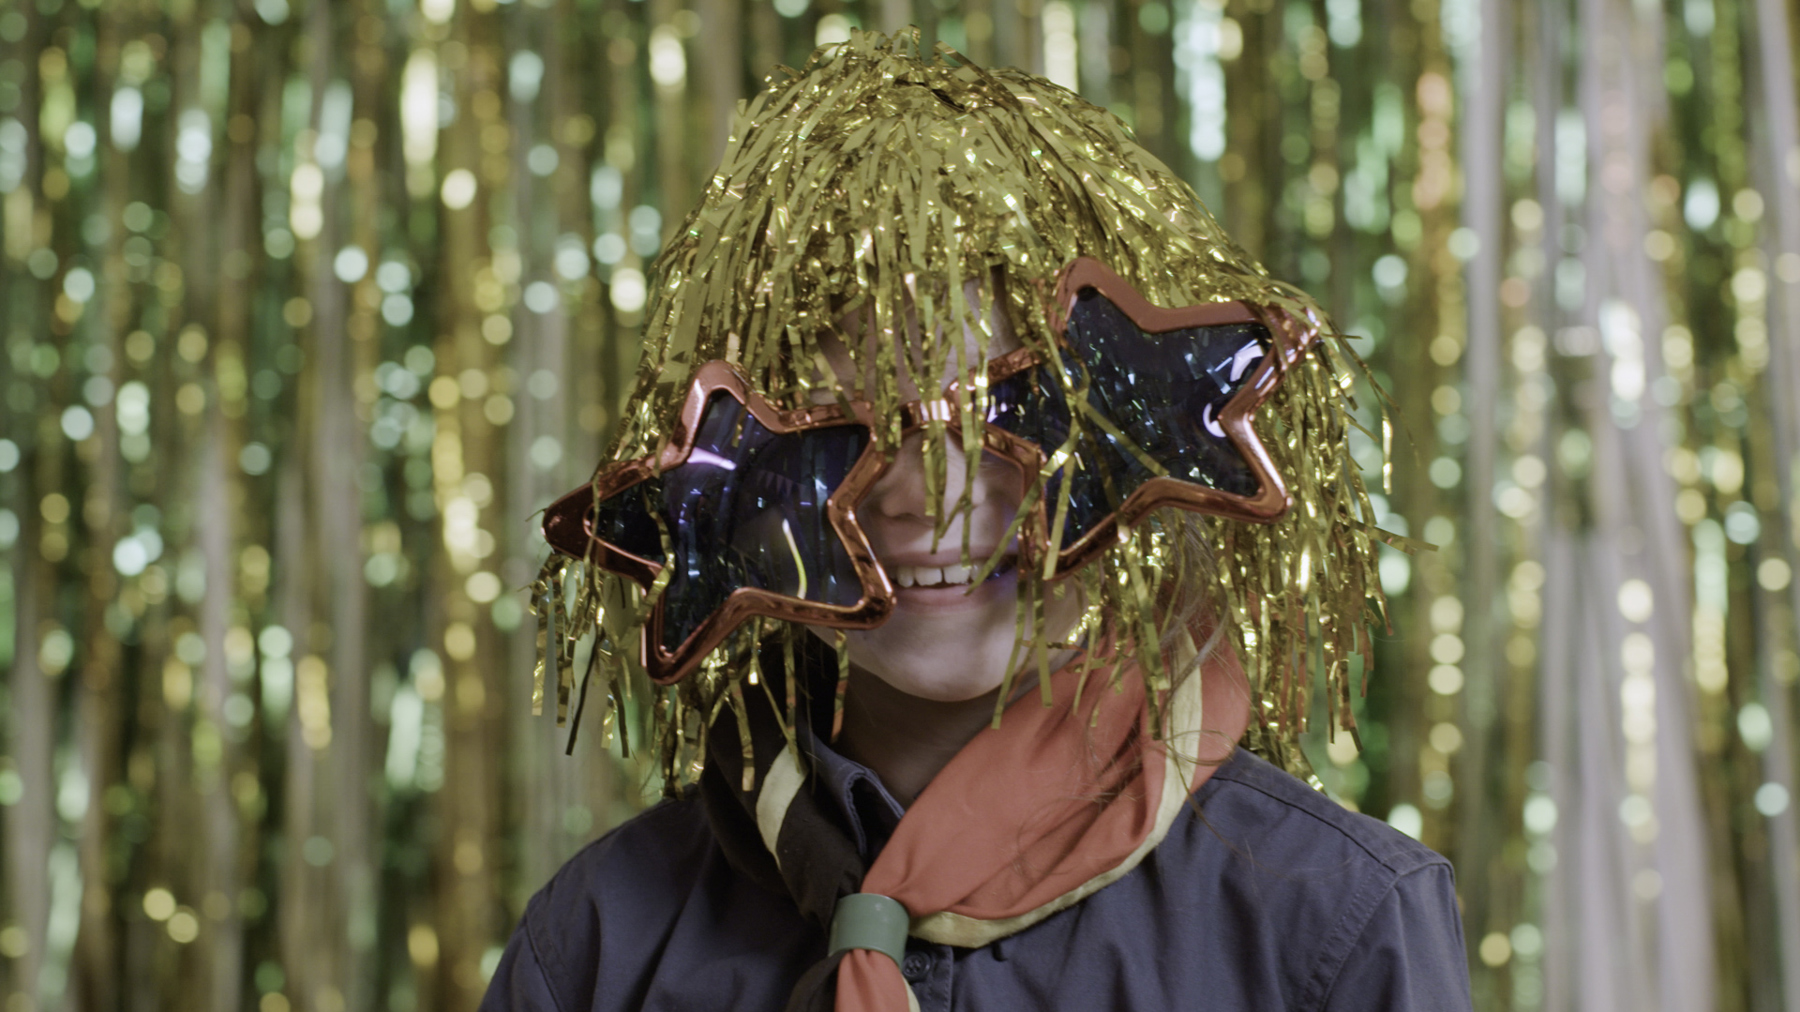 A young Squirrel is smiling while wearing a sparkly, gold tinsel wig and big, red, star shaped glasses. He is wearing a necker and against a gold tinsel backdrop.